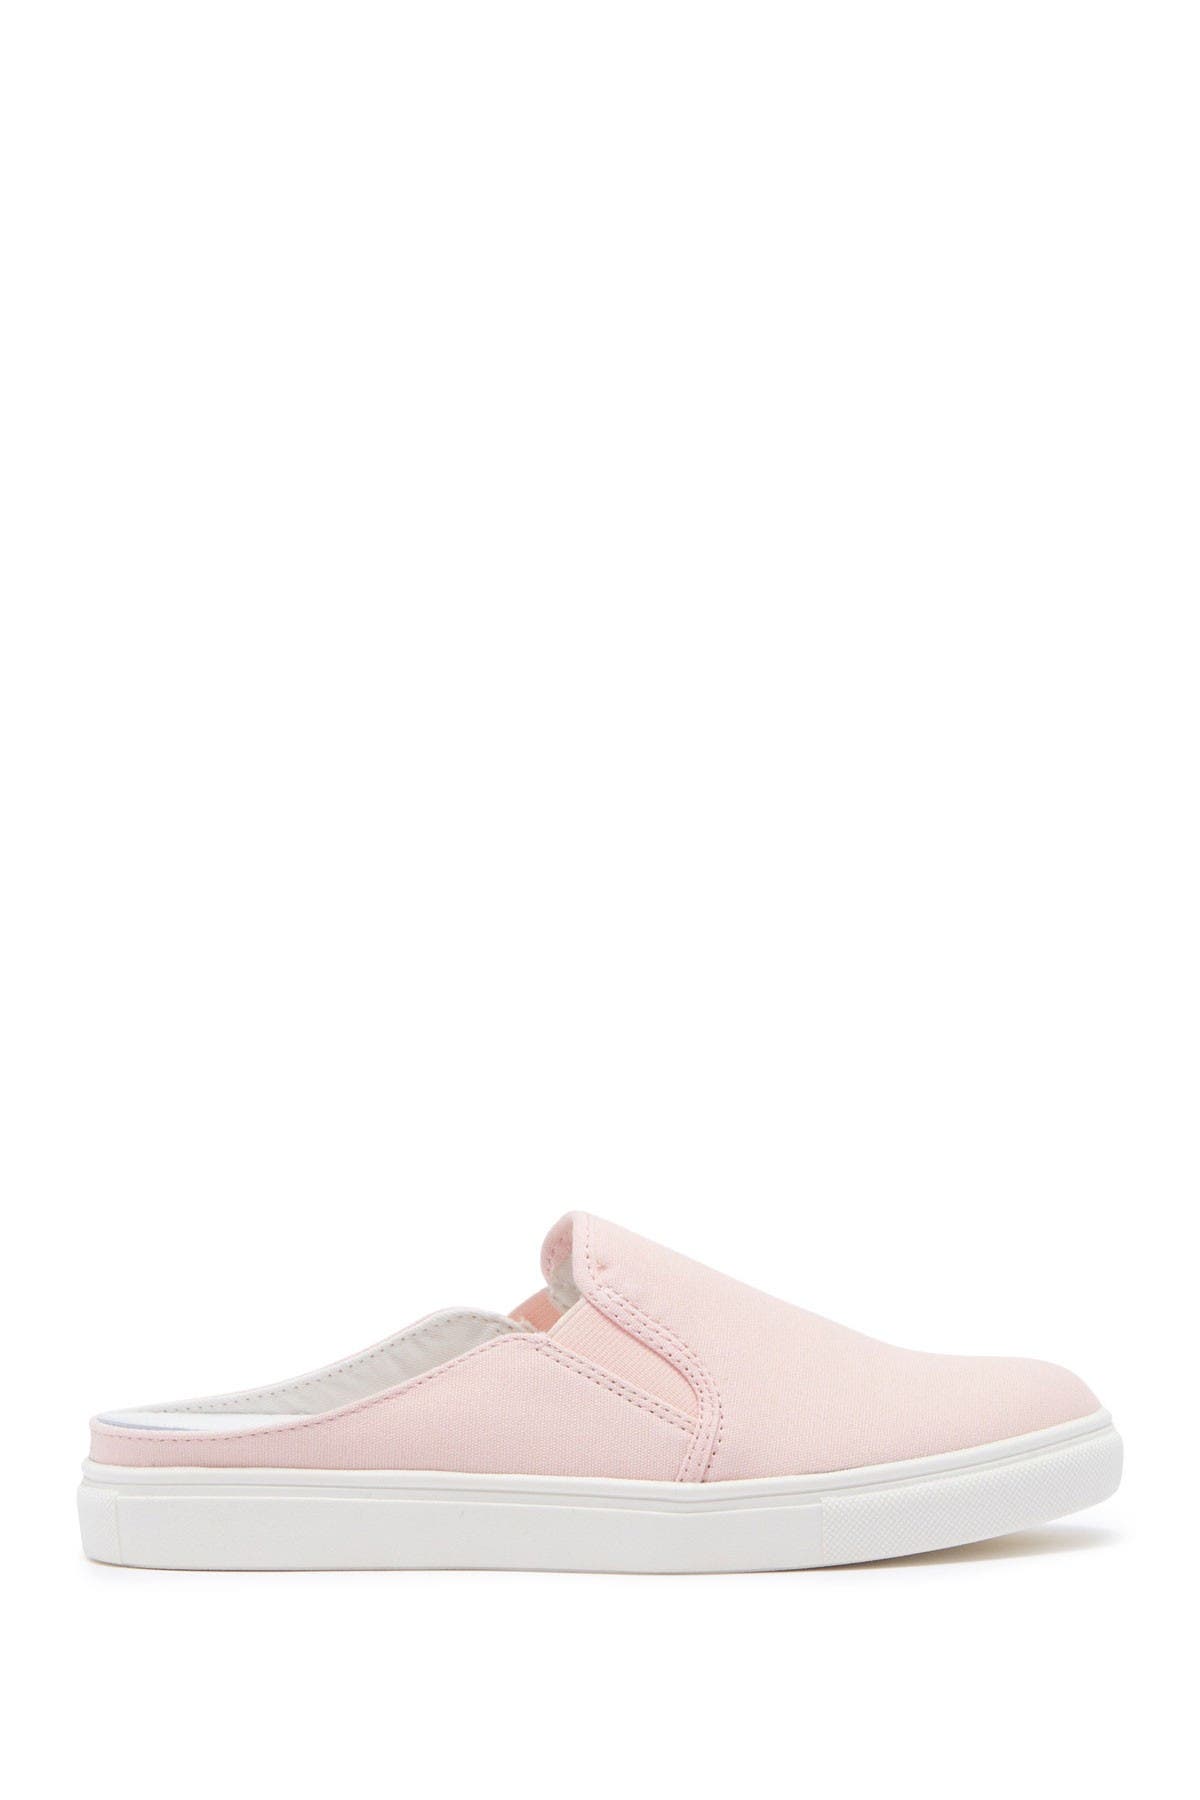 Abound Daphne Mule Sneaker In Pink Creole